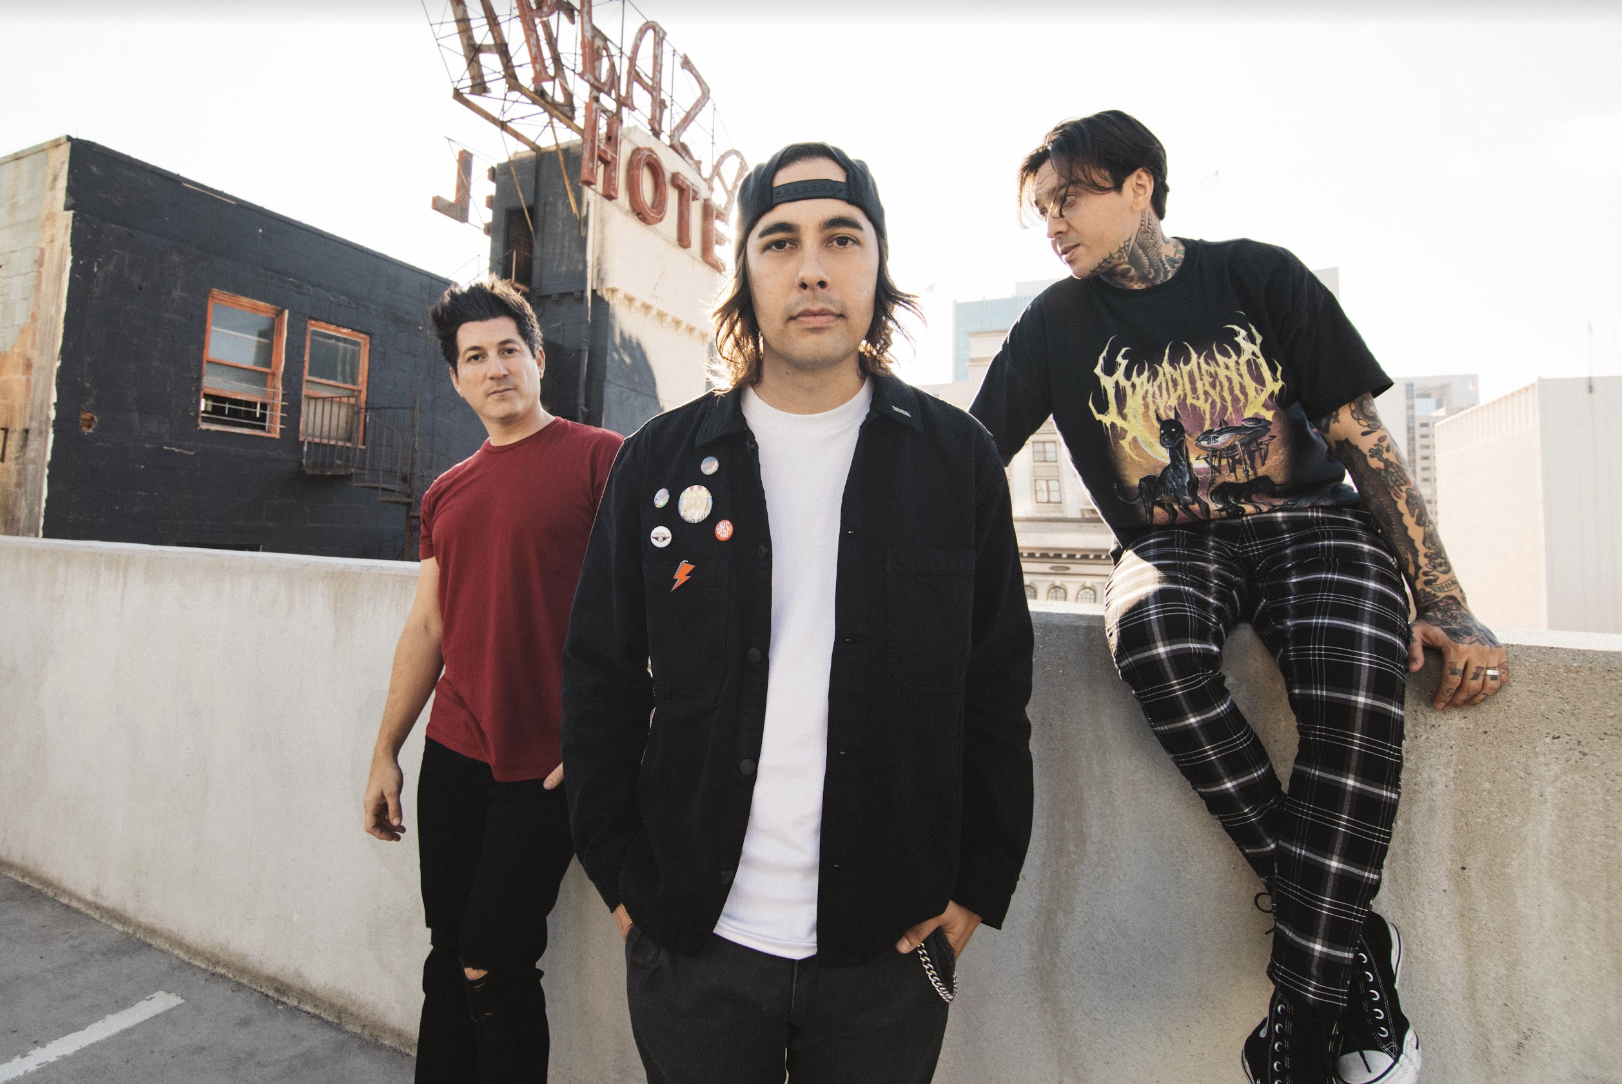 Pierce The Veil release new album ‘The Jaws Of Life’